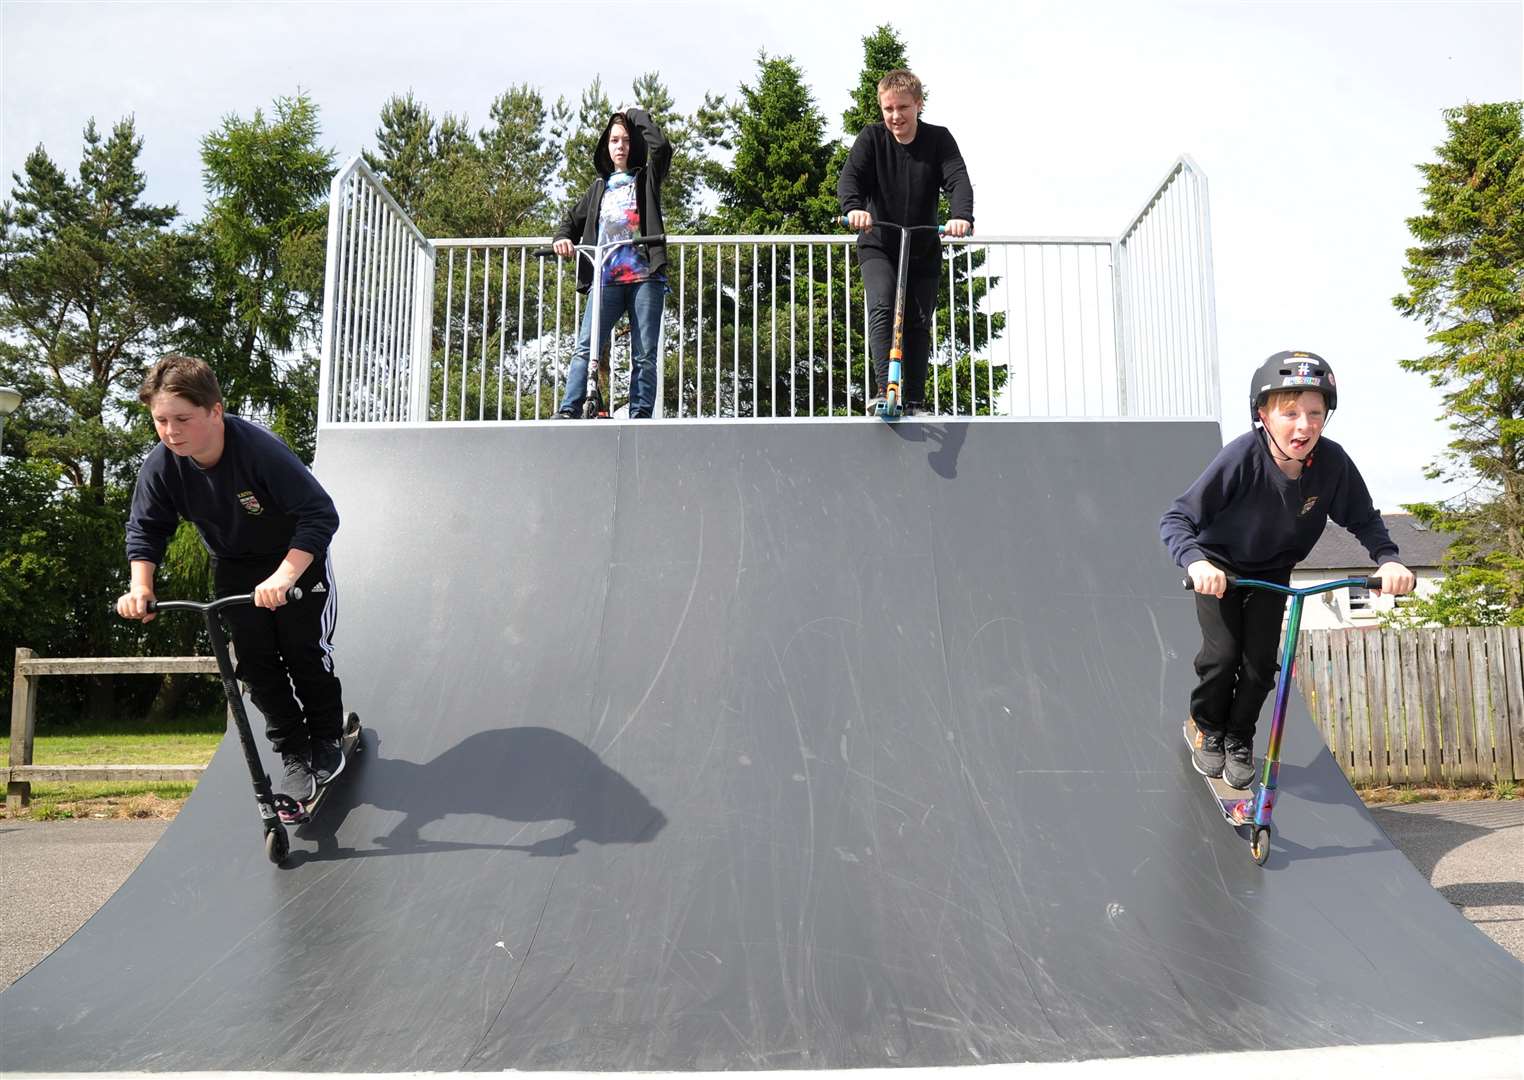 Children enjoy the skate park. From left, Finlay Paton, Harley Farqurson, Riley Martin and Marc McHardy. Picture: Eric Cormack.